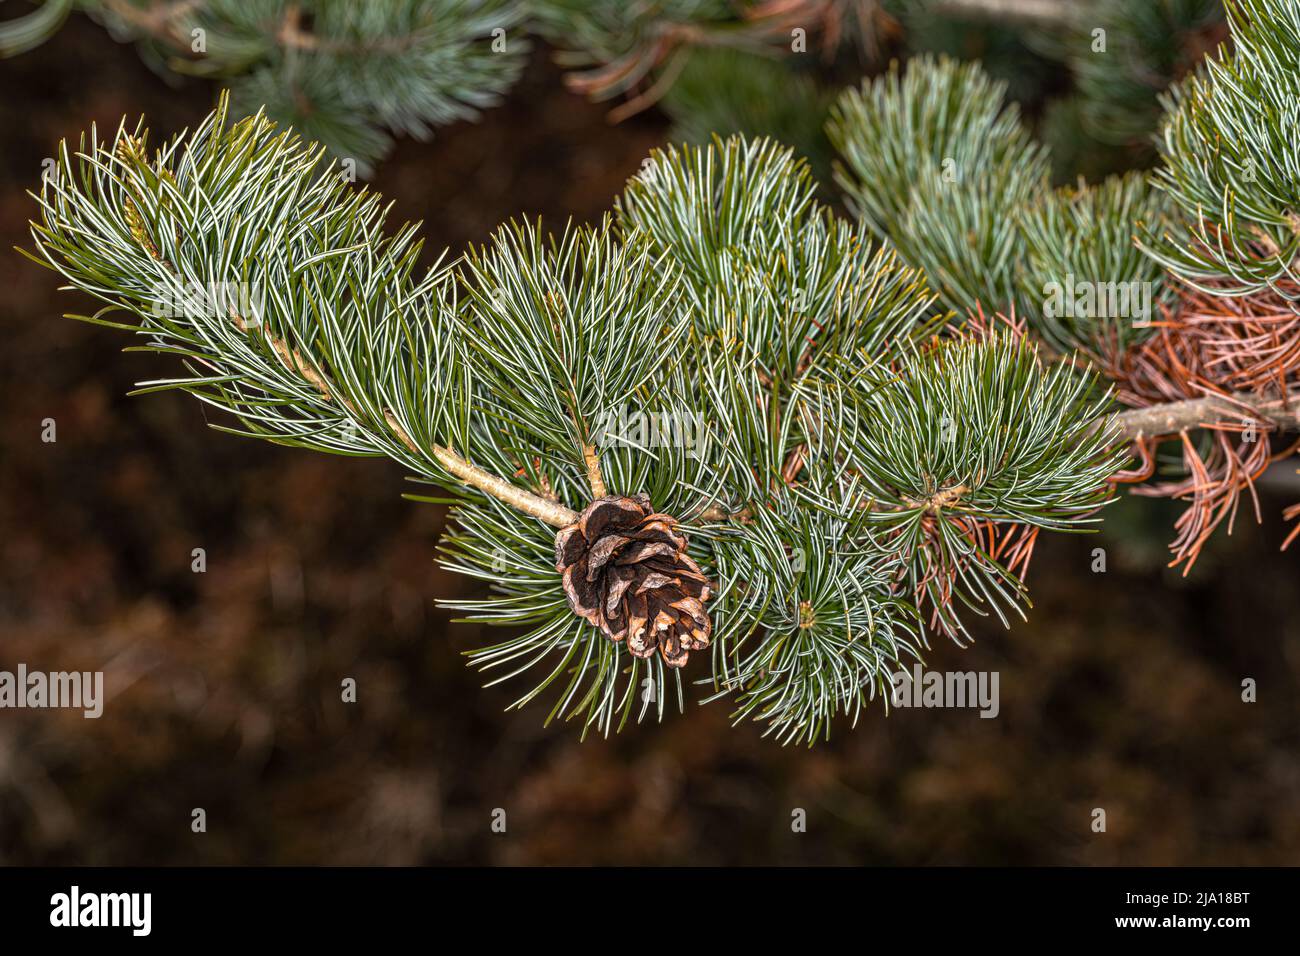 Leaves and Cone of Japanese White Pine (Pinus parviflora) Stock Photo